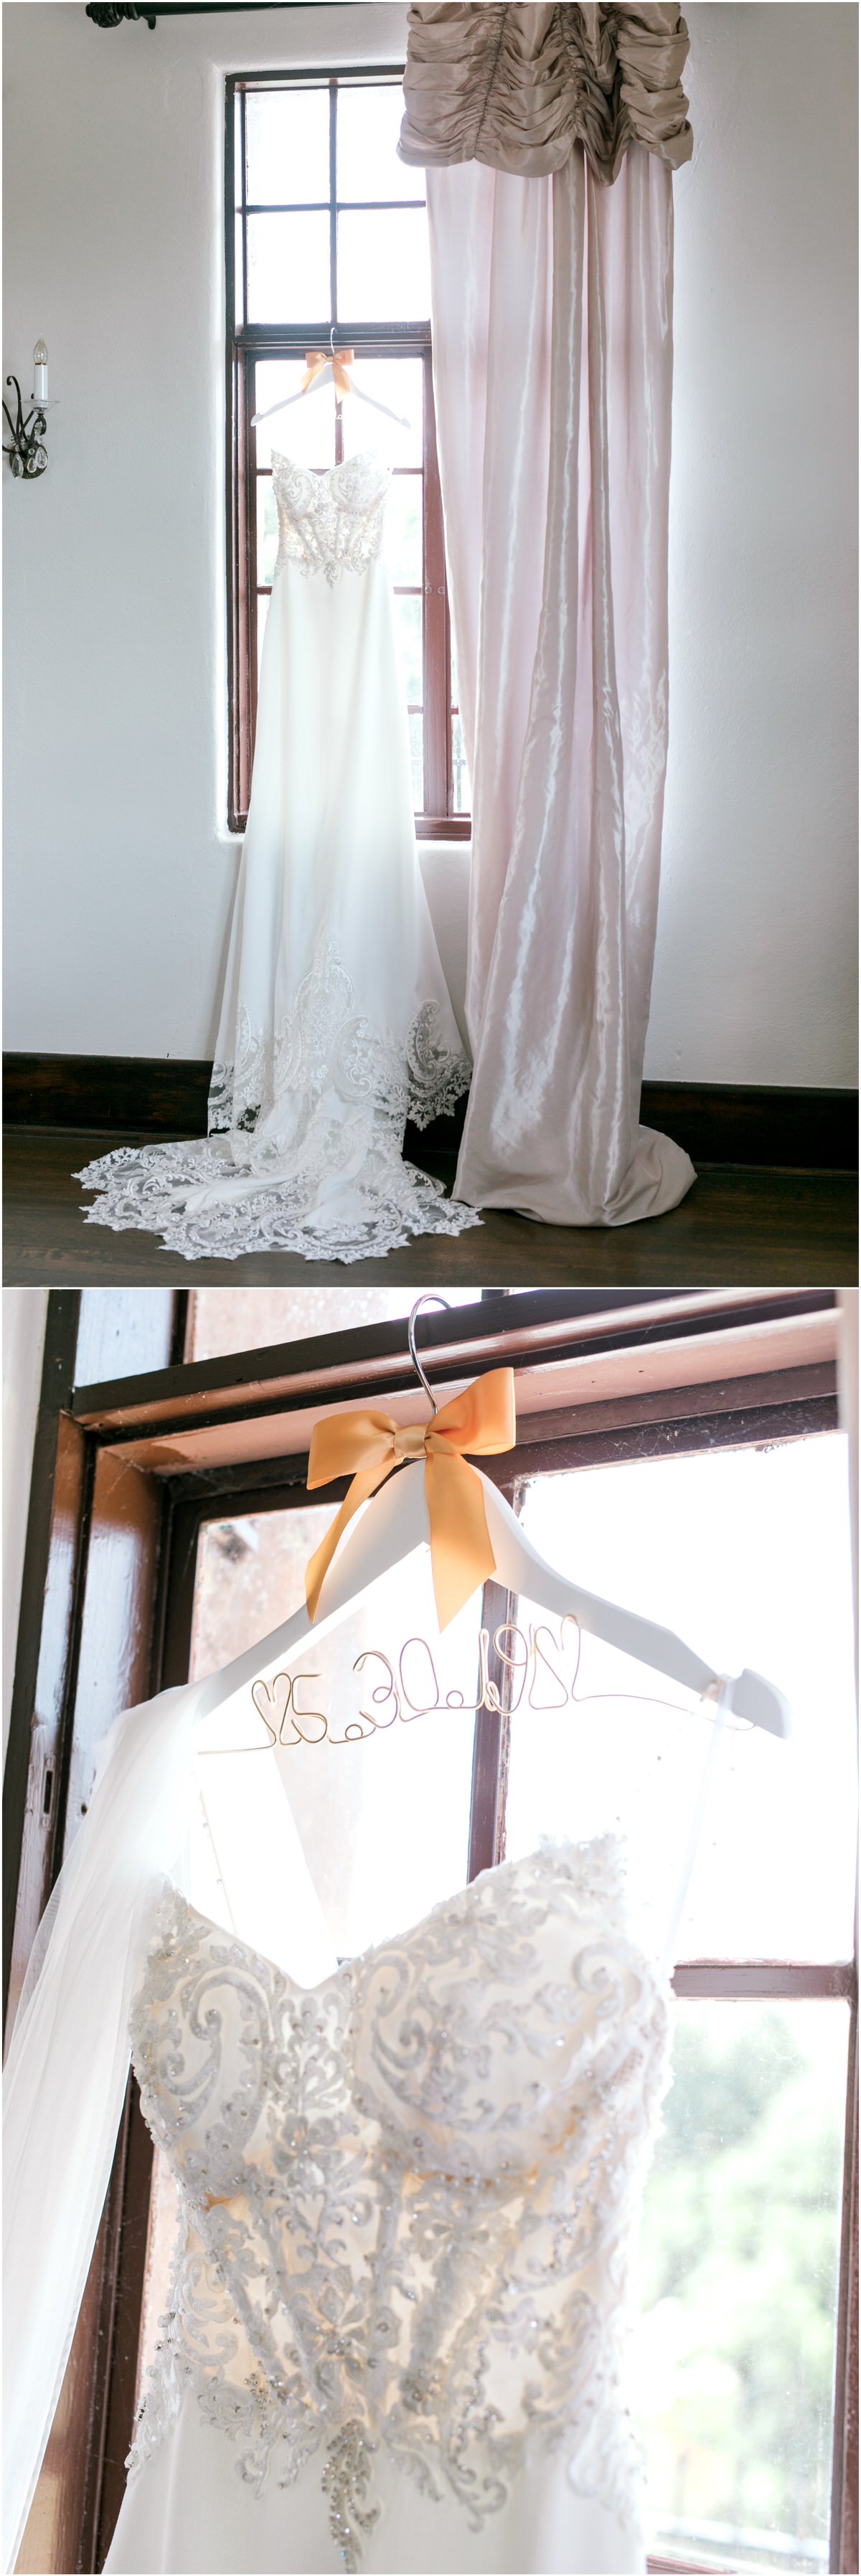 Wedding dress hanging in the window at the howey mansion